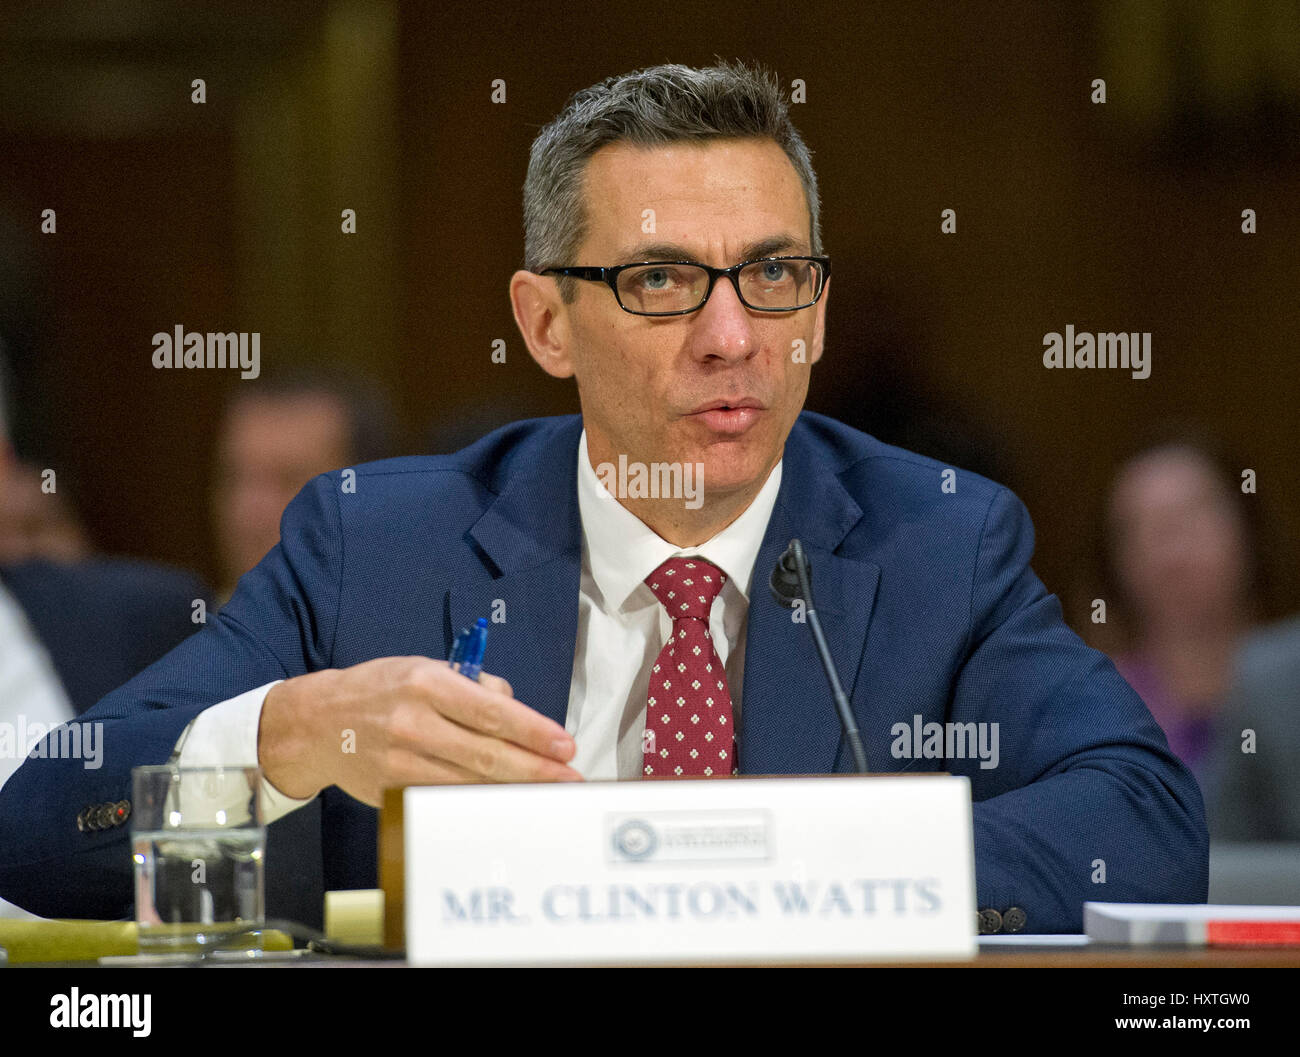 Washington DC, USA. 30th March 2017. Clinton Watts, Senior Fellow, Foreign Policy Research Institute Program on National Security testifies before the United States Senate Select Committee on Intelligence as it conducts an open hearing titled 'Disinformation: A Primer in Russian Active Measures and Influence Campaigns' on Capitol Hill in Washington, DC on Thursday, March 30, 2017. Credit: Ron Sachs/CNP /MediaPunch/Alamy Live News Stock Photo